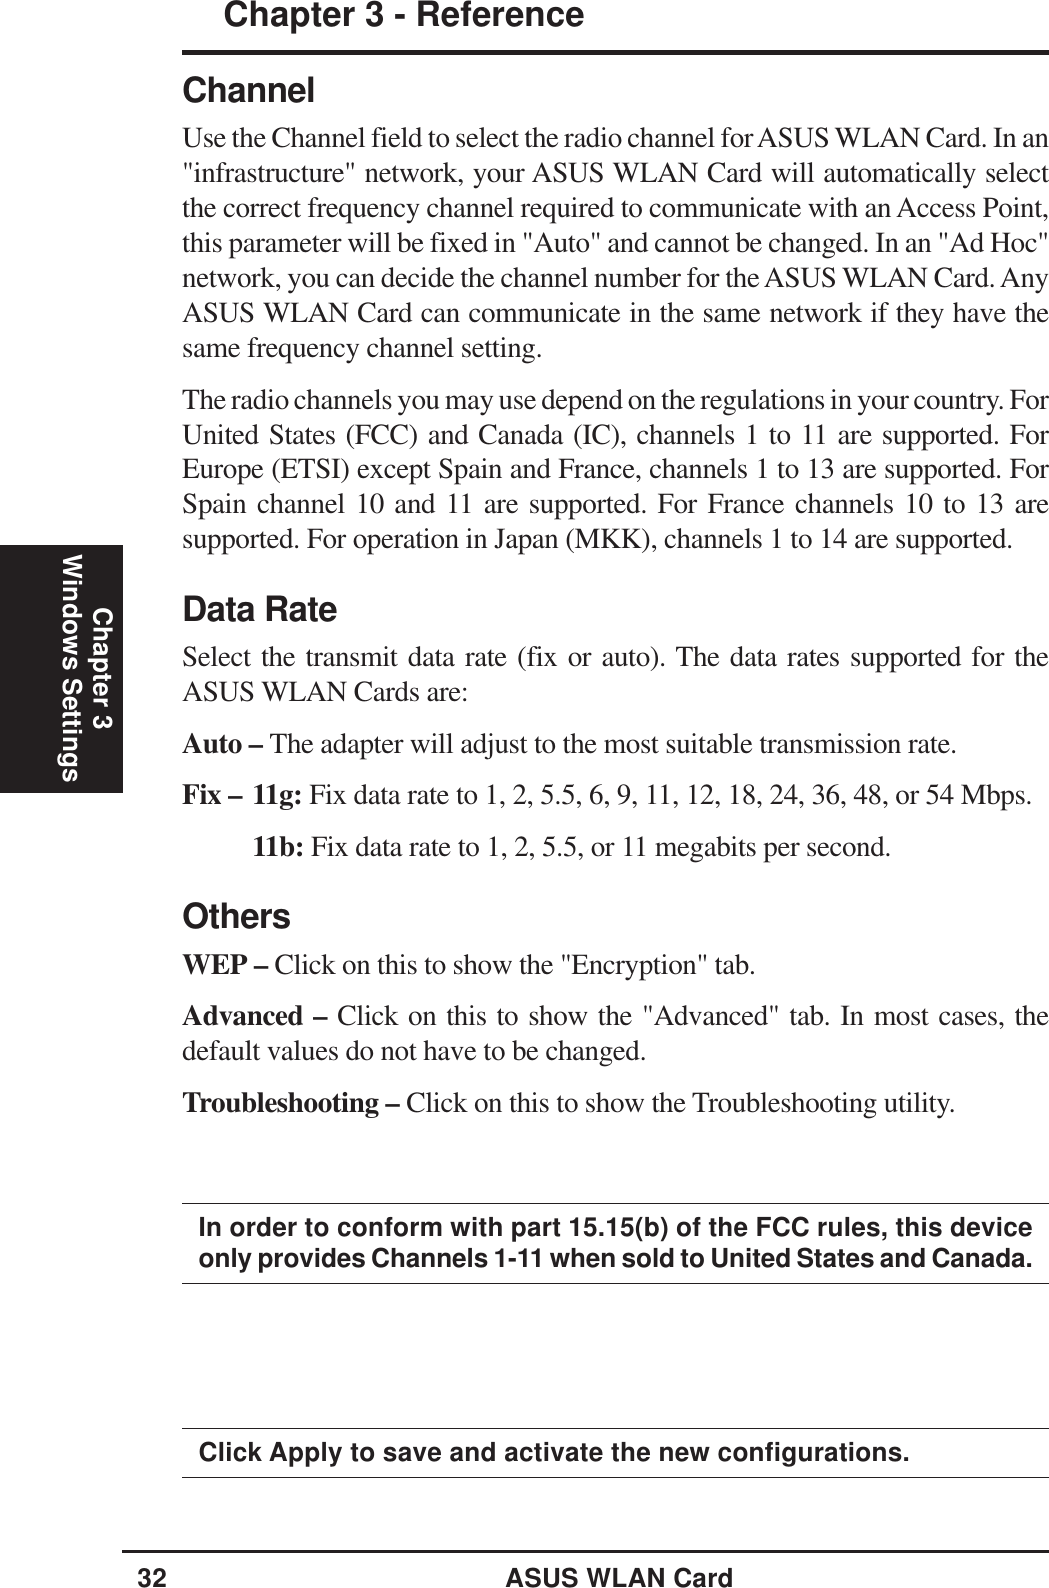 32 ASUS WLAN CardChapter 3 - ReferenceChapter 3Windows SettingsClick Apply to save and activate the new configurations.ChannelUse the Channel field to select the radio channel for ASUS WLAN Card. In an&quot;infrastructure&quot; network, your ASUS WLAN Card will automatically selectthe correct frequency channel required to communicate with an Access Point,this parameter will be fixed in &quot;Auto&quot; and cannot be changed. In an &quot;Ad Hoc&quot;network, you can decide the channel number for the ASUS WLAN Card. AnyASUS WLAN Card can communicate in the same network if they have thesame frequency channel setting.The radio channels you may use depend on the regulations in your country. ForUnited States (FCC) and Canada (IC), channels 1 to 11 are supported. ForEurope (ETSI) except Spain and France, channels 1 to 13 are supported. ForSpain channel 10 and 11 are supported. For France channels 10 to 13 aresupported. For operation in Japan (MKK), channels 1 to 14 are supported.Data RateSelect the transmit data rate (fix or auto). The data rates supported for theASUS WLAN Cards are:Auto – The adapter will adjust to the most suitable transmission rate.Fix – 11g: Fix data rate to 1, 2, 5.5, 6, 9, 11, 12, 18, 24, 36, 48, or 54 Mbps.11b: Fix data rate to 1, 2, 5.5, or 11 megabits per second.OthersWEP – Click on this to show the &quot;Encryption&quot; tab.Advanced – Click on this to show the &quot;Advanced&quot; tab. In most cases, thedefault values do not have to be changed.Troubleshooting – Click on this to show the Troubleshooting utility.In order to conform with part 15.15(b) of the FCC rules, this deviceonly provides Channels 1-11 when sold to United States and Canada.